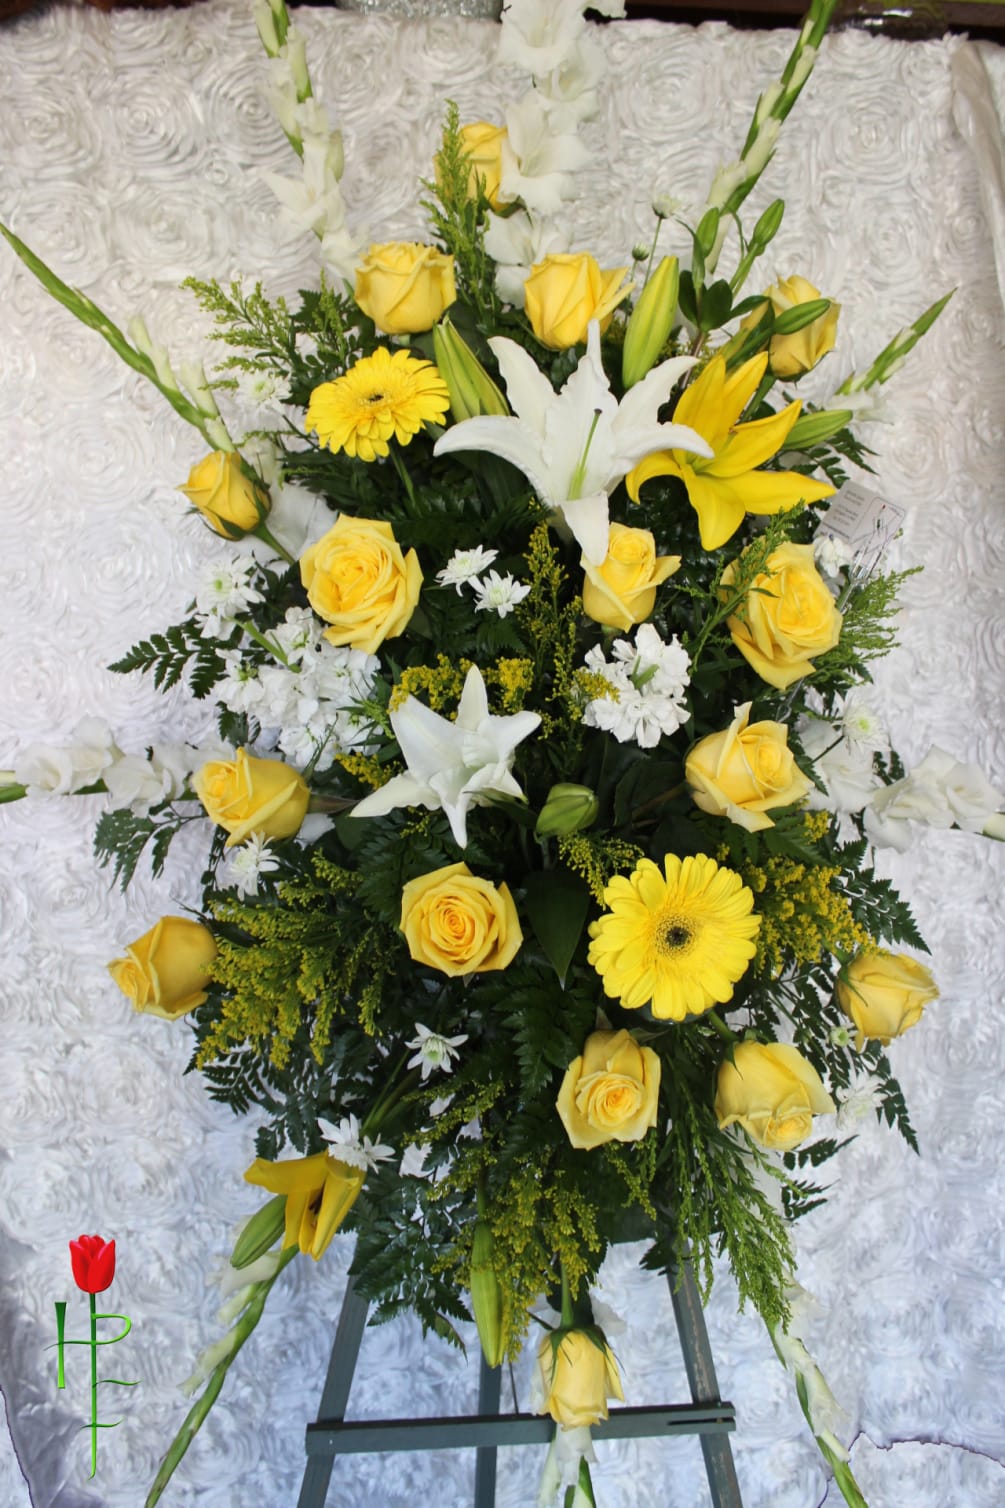 This is our Funeral Spray Arrangement designed with a Mixture of Yellow